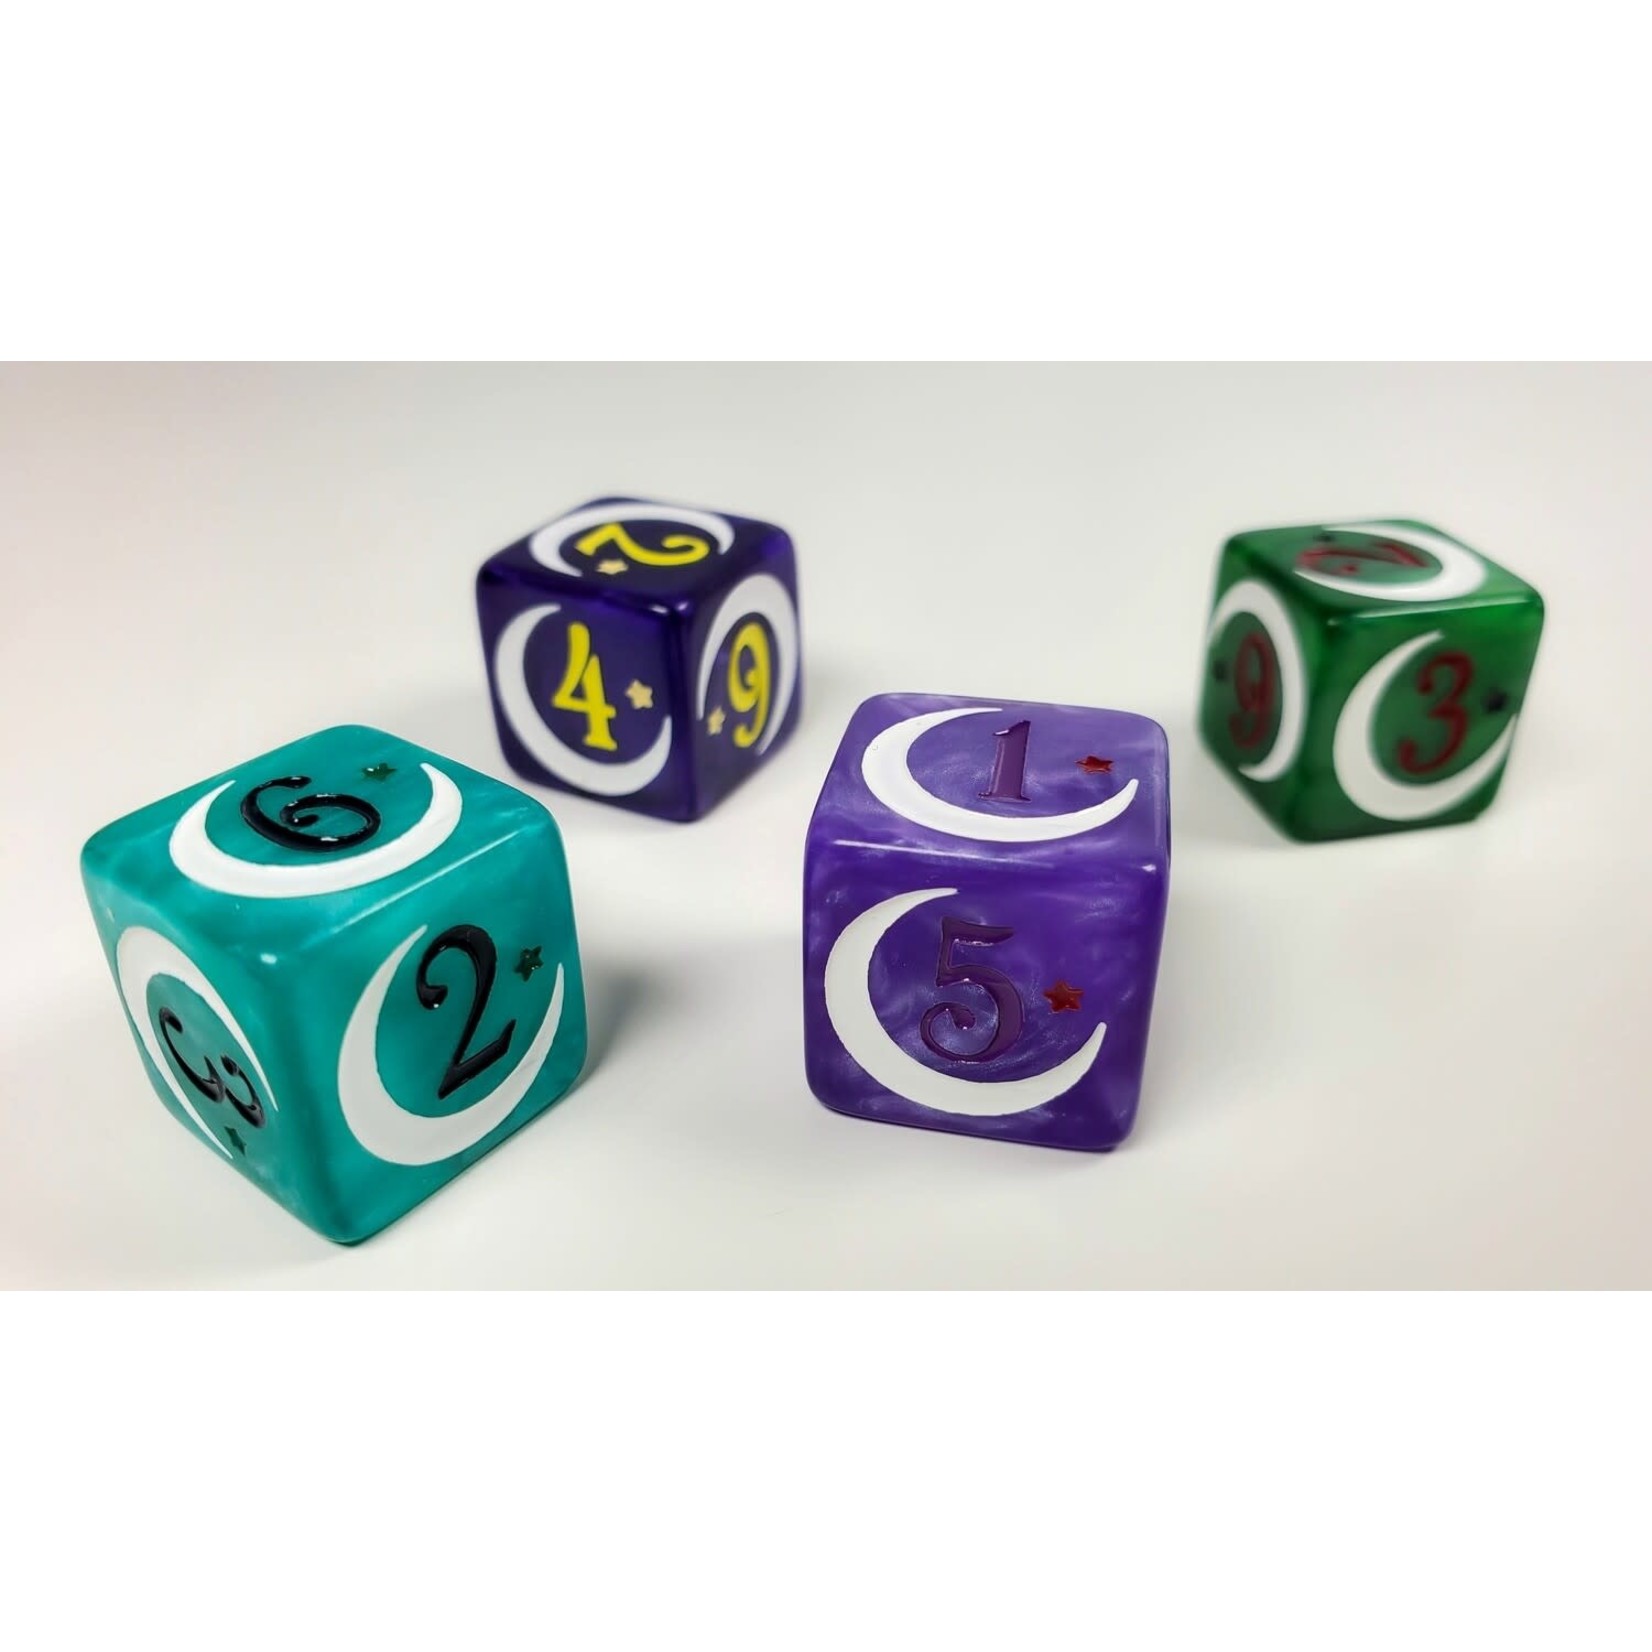 Outer Magical Girl Dice - Pack of 4